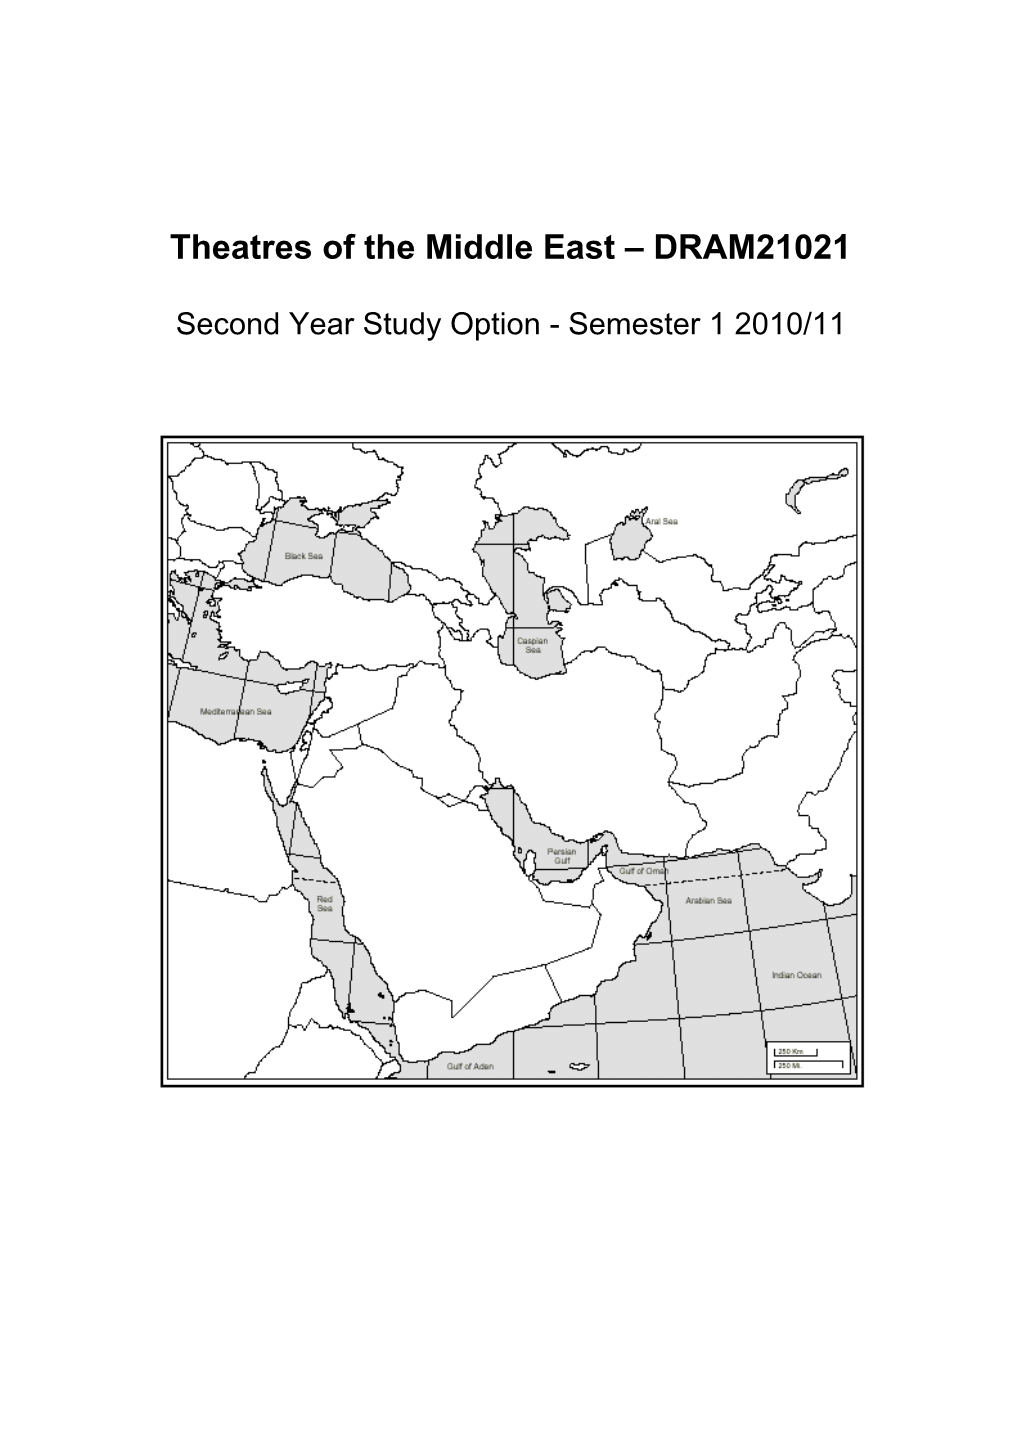 Theatres of the Middle East DRAM21021